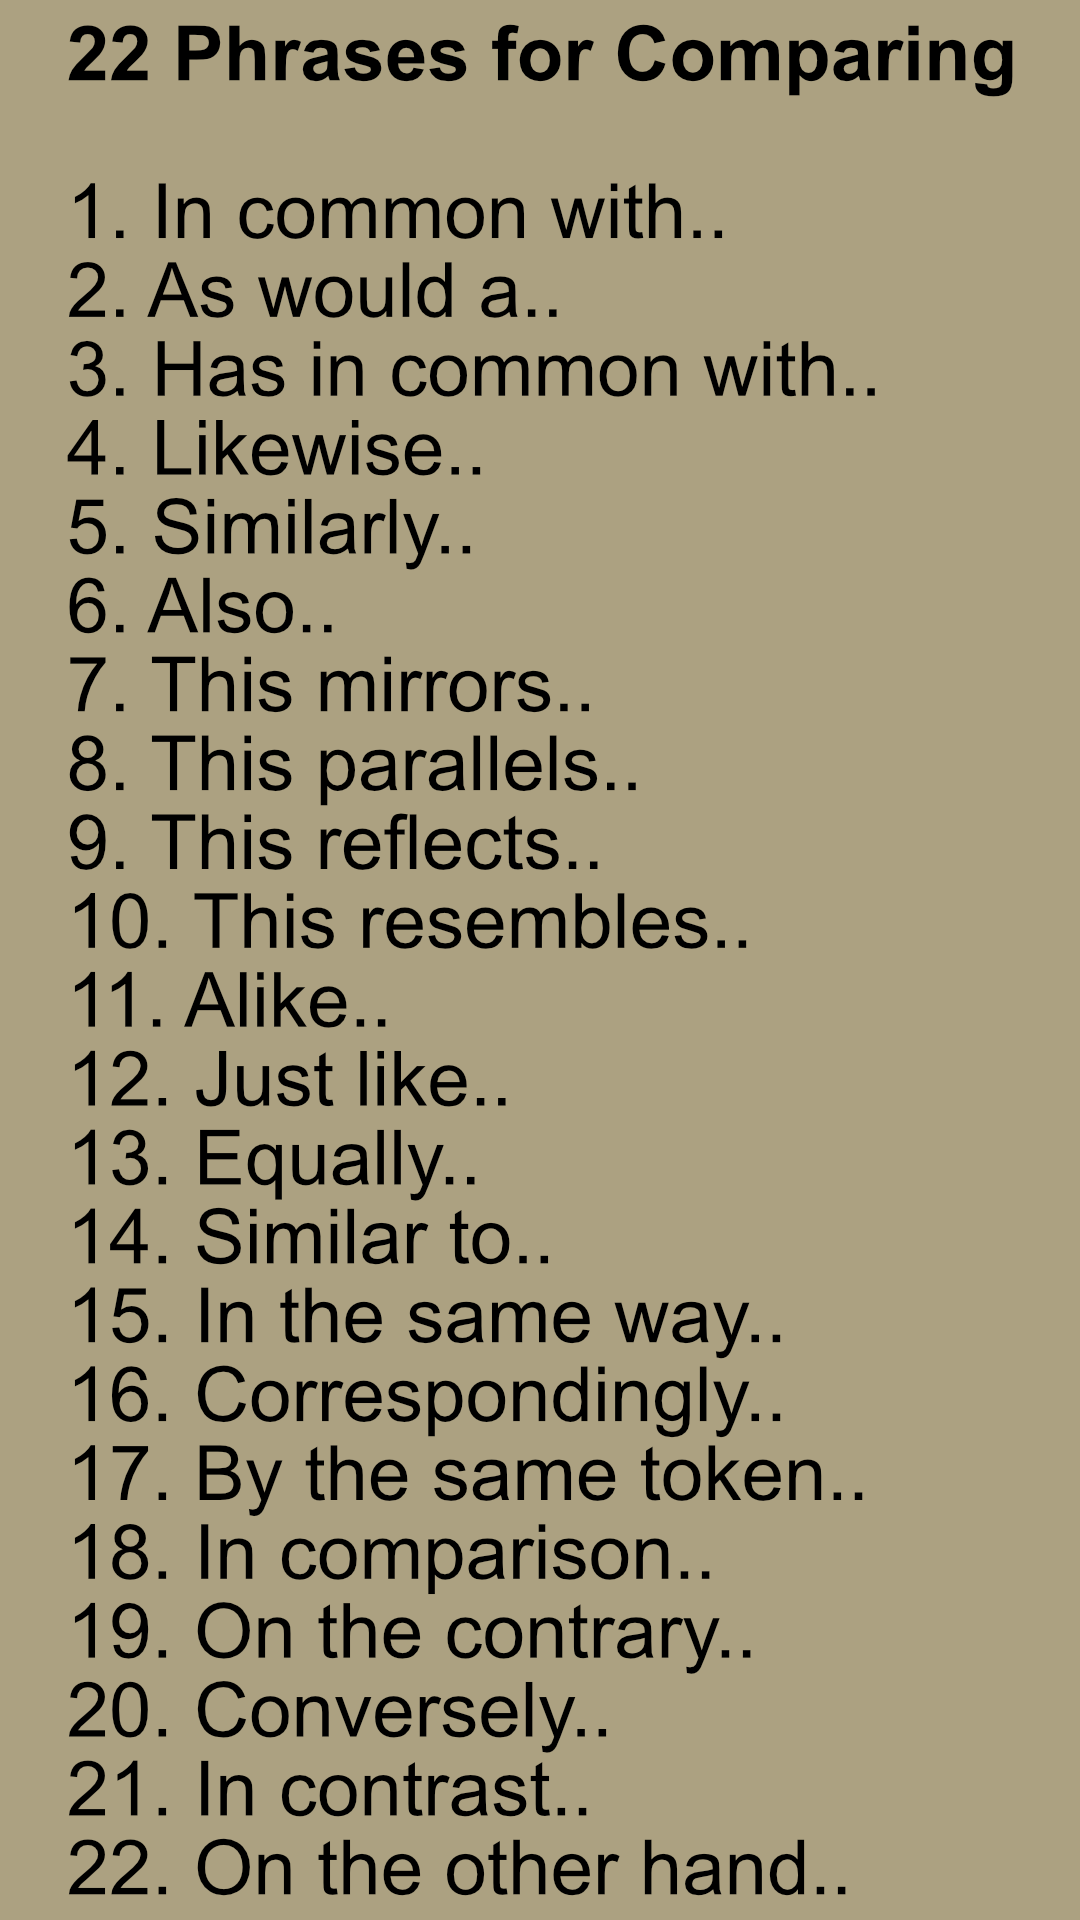 Phrases for Comparing